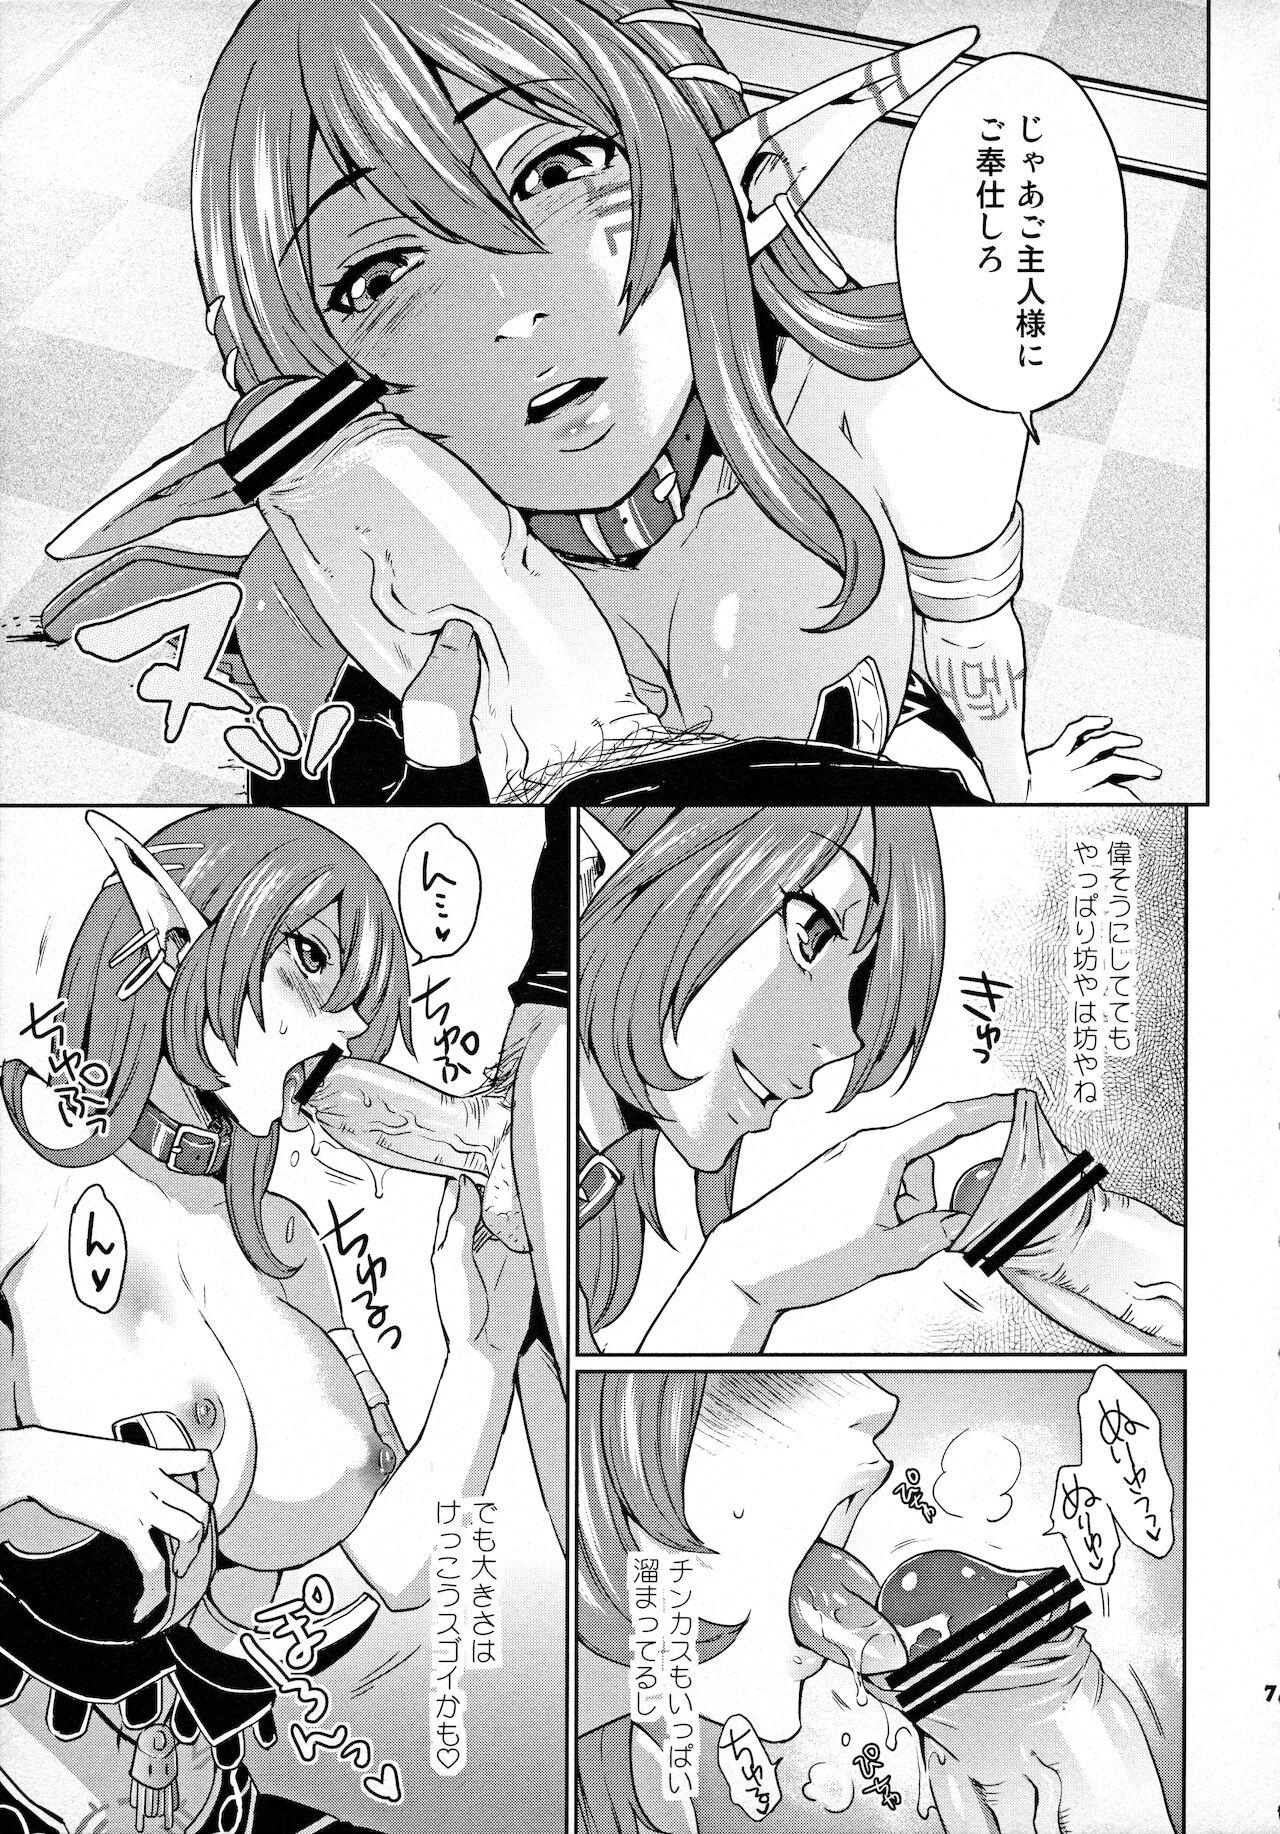 Smooth Hoshi no Umi no Miboujin - The Widow of The Star Ocean - Star ocean 4 Penis Sucking - Page 6